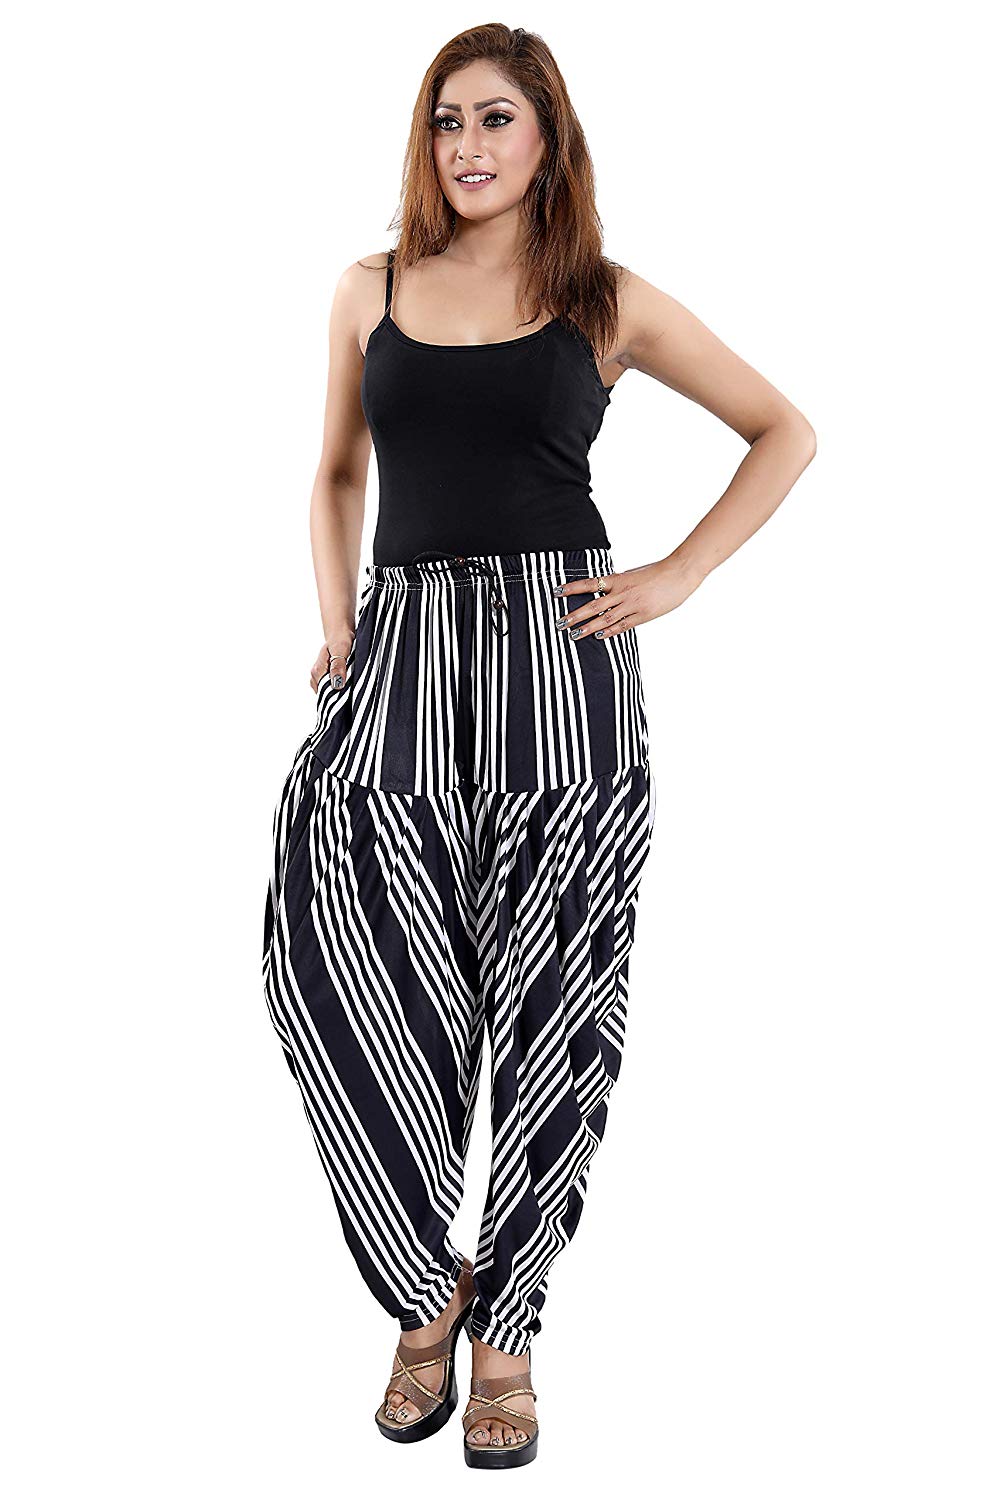 Women's Lines Printed Casual Wear Dhoti Bottom with Pocket